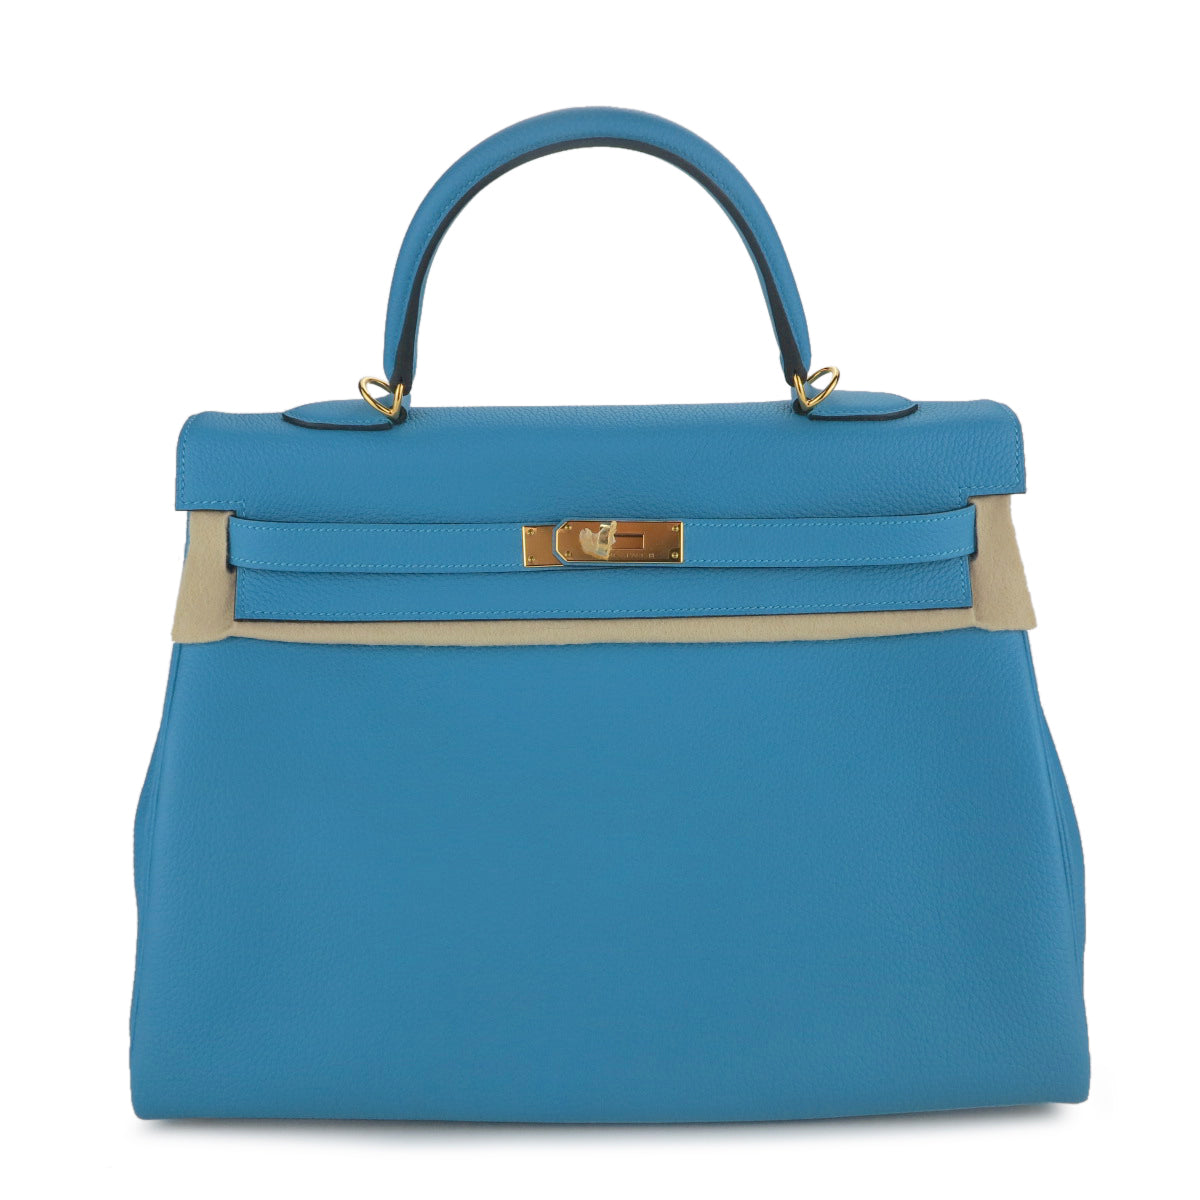 Kelly 35 in Turquoise Togo Leather